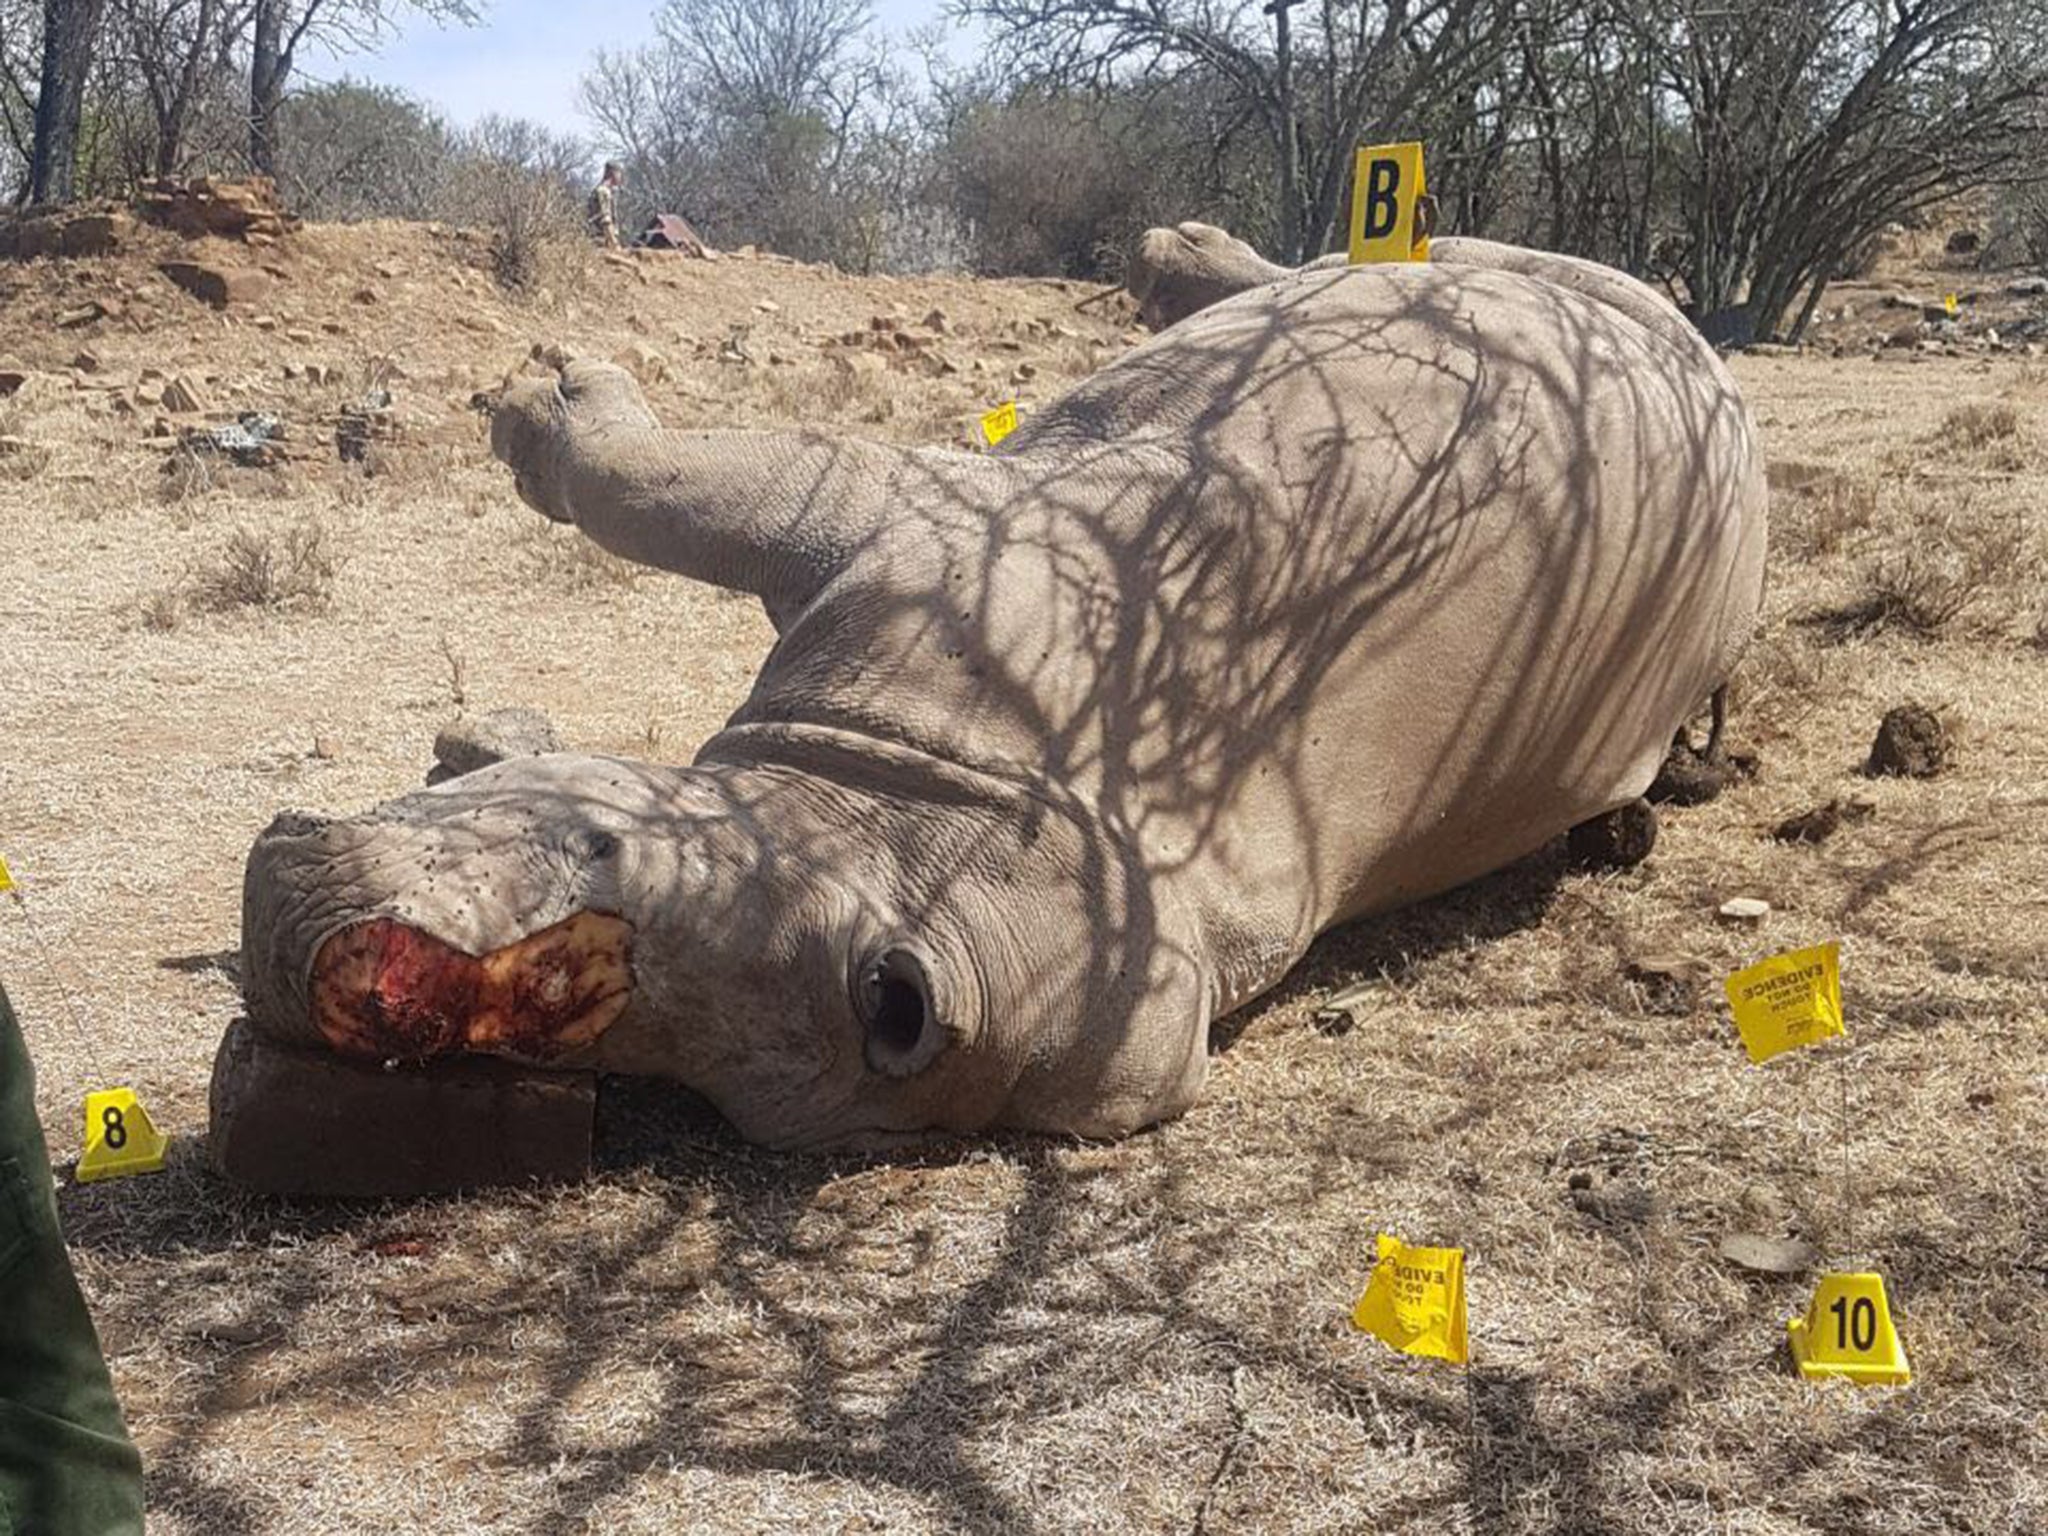 A herd of rhinos was recently killed in a private game reserve in South Africa